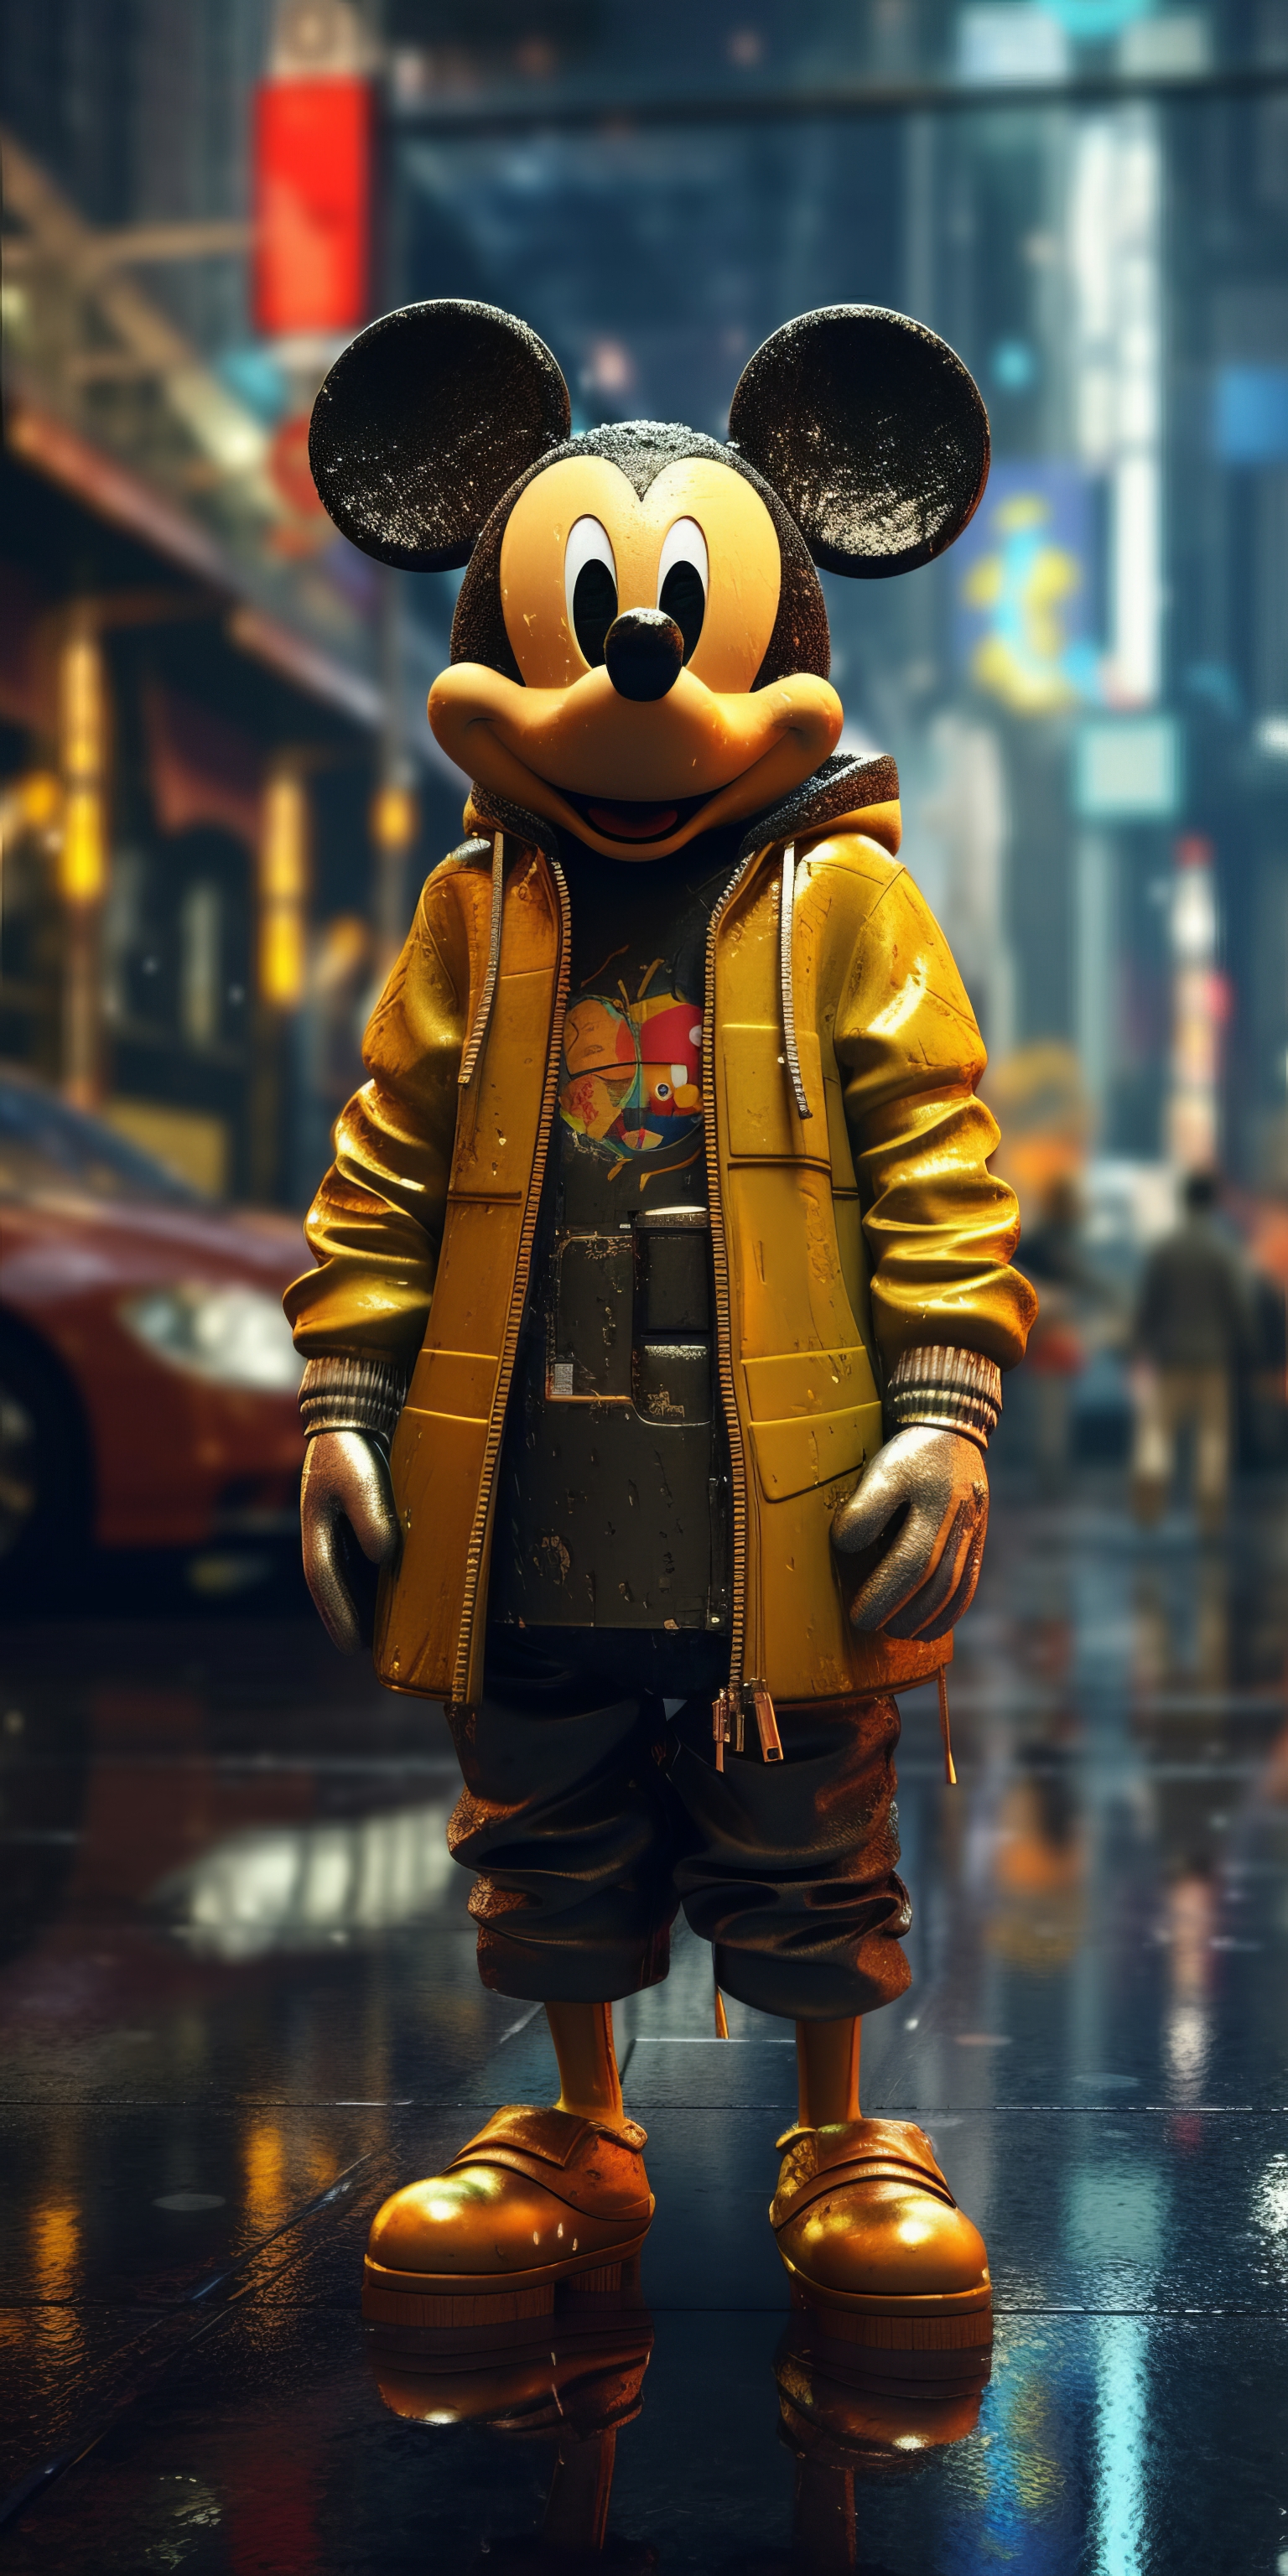 General 1536x3072 AI art portrait display illustration yellow Mickey Mouse cyberpunk looking at viewer reflection city